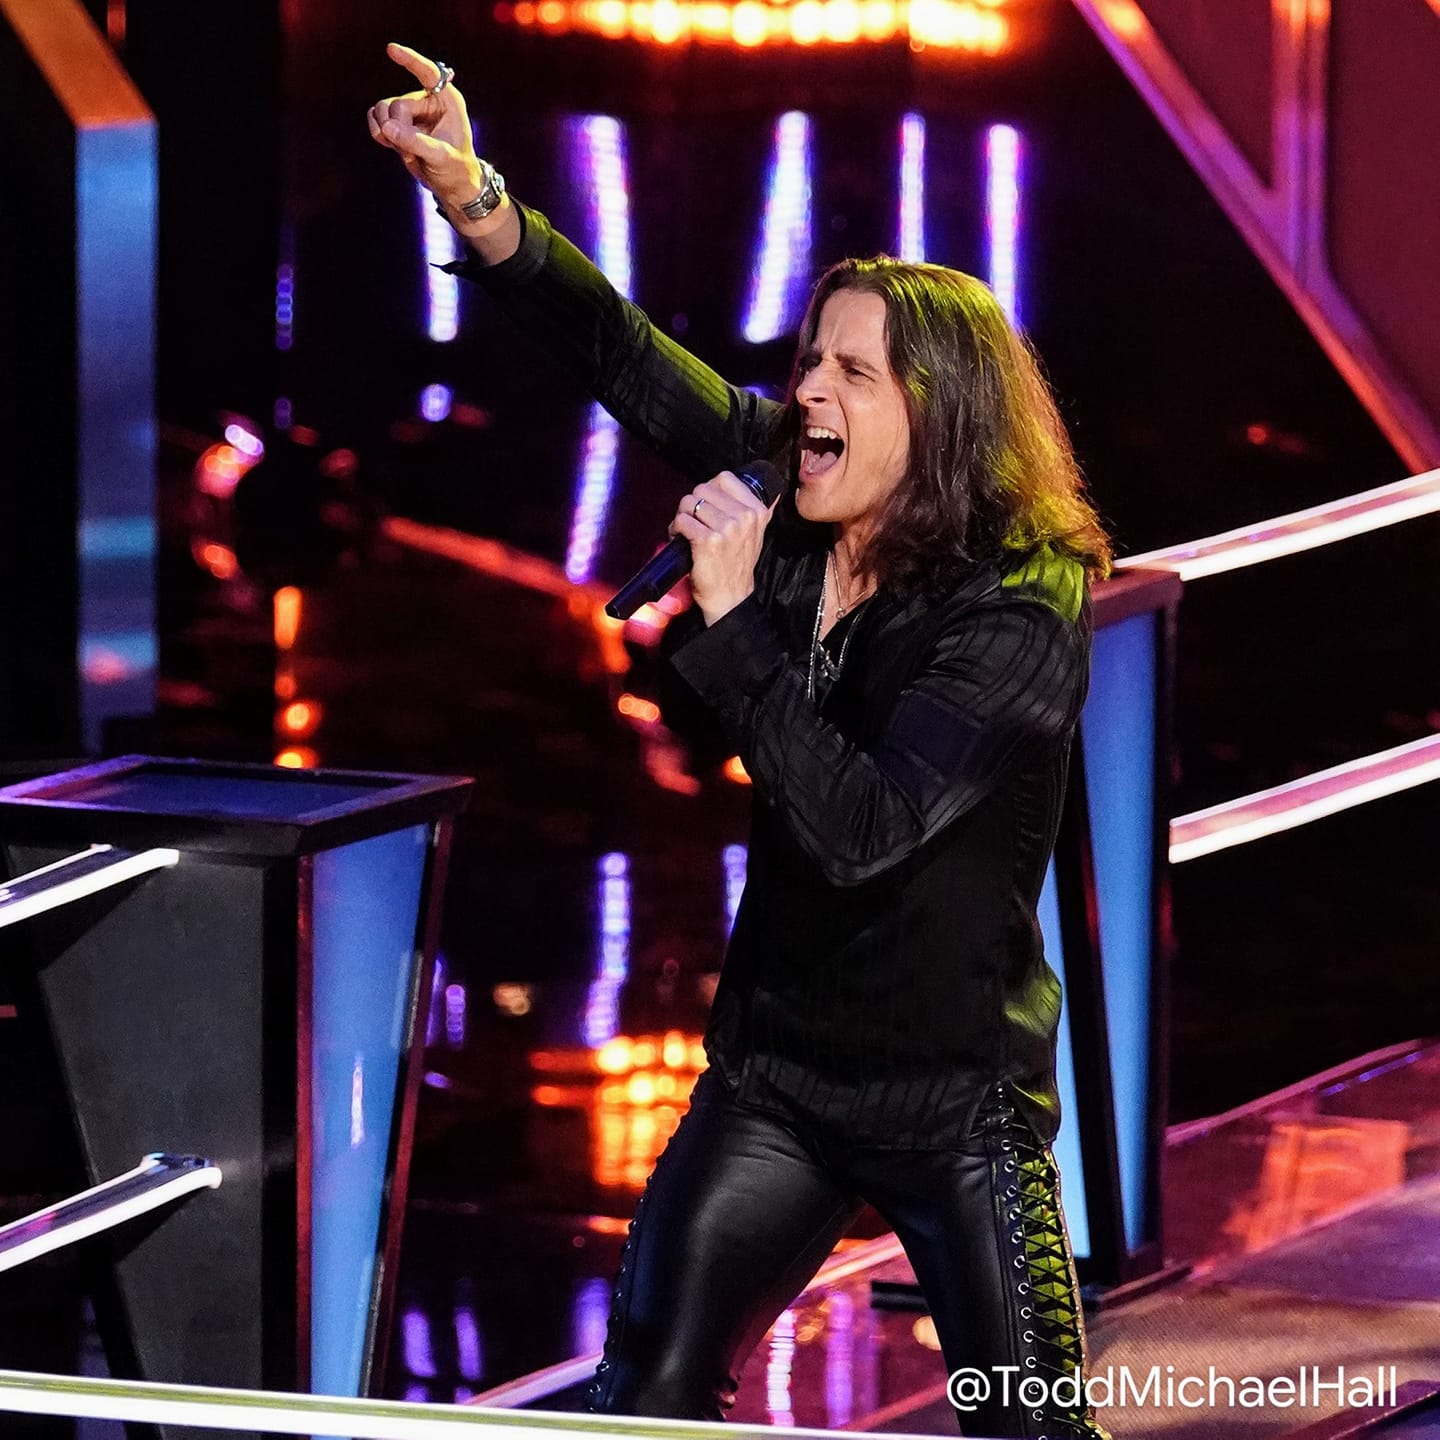 Todd Michael Hall from Saginaw amazes on NBC's "The Voice" Photo